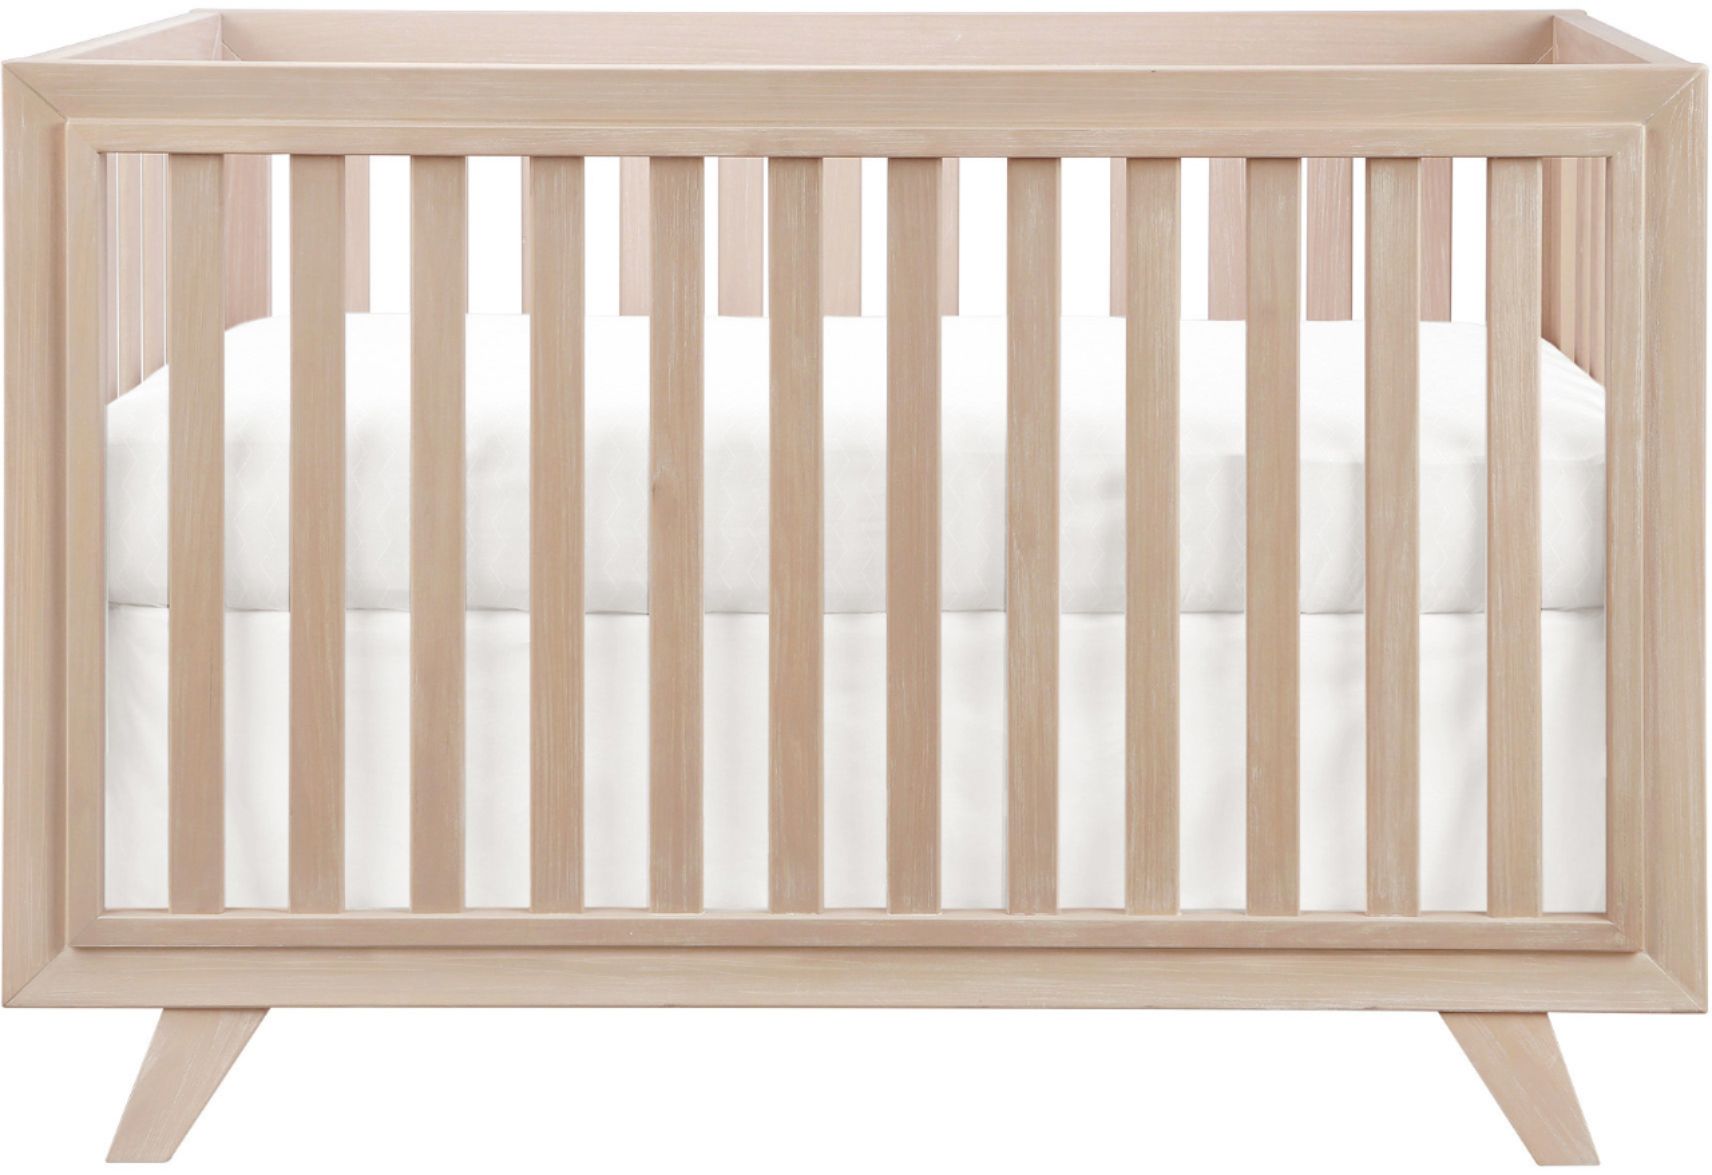 wooster 3 in 1 crib